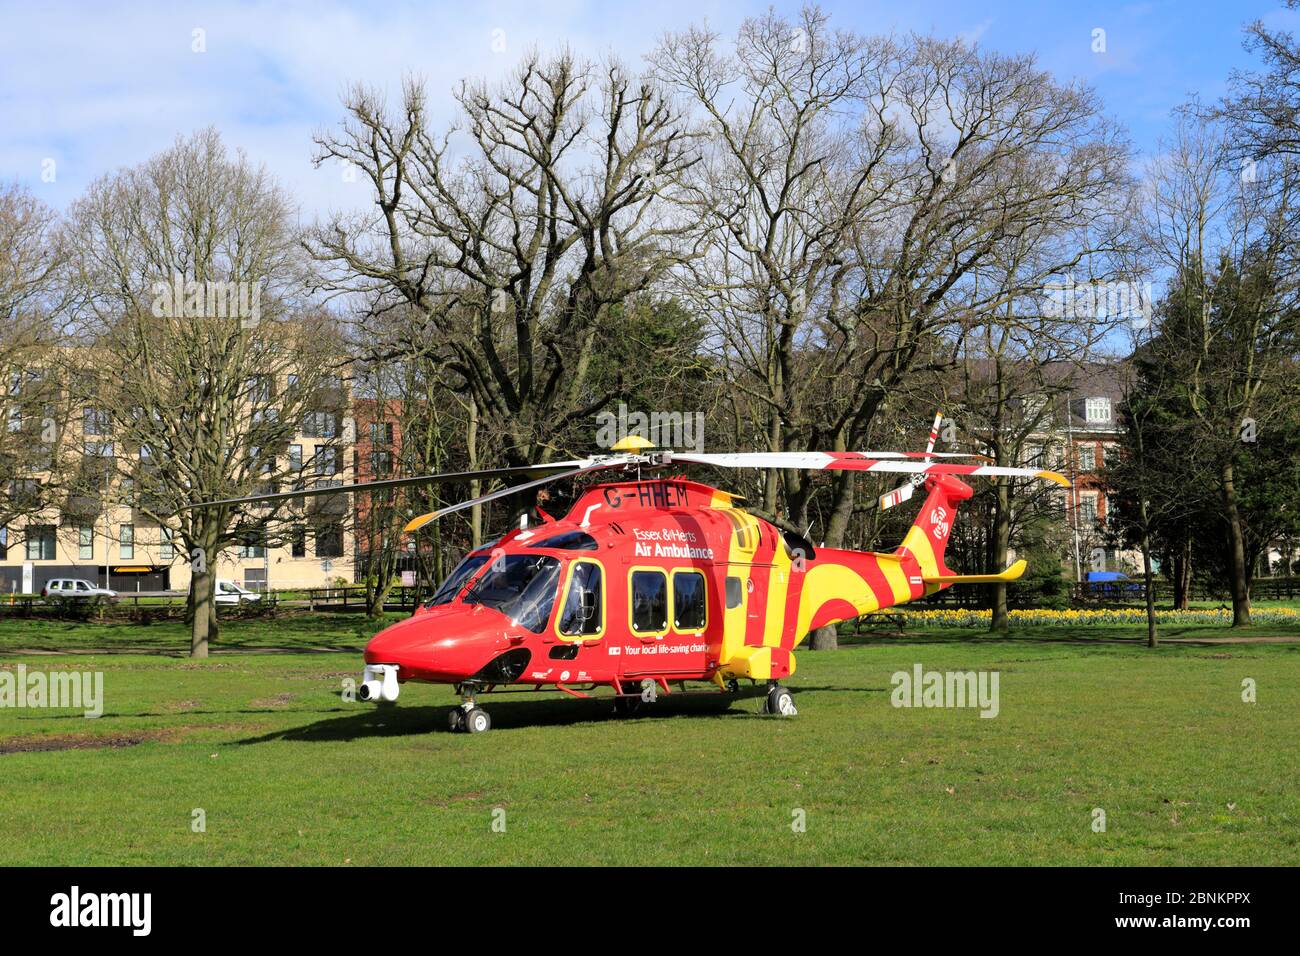 The Essex and Herts Air Ambulance in Central Park, Chelmsford City, Essex County, Inghilterra, UK Foto Stock